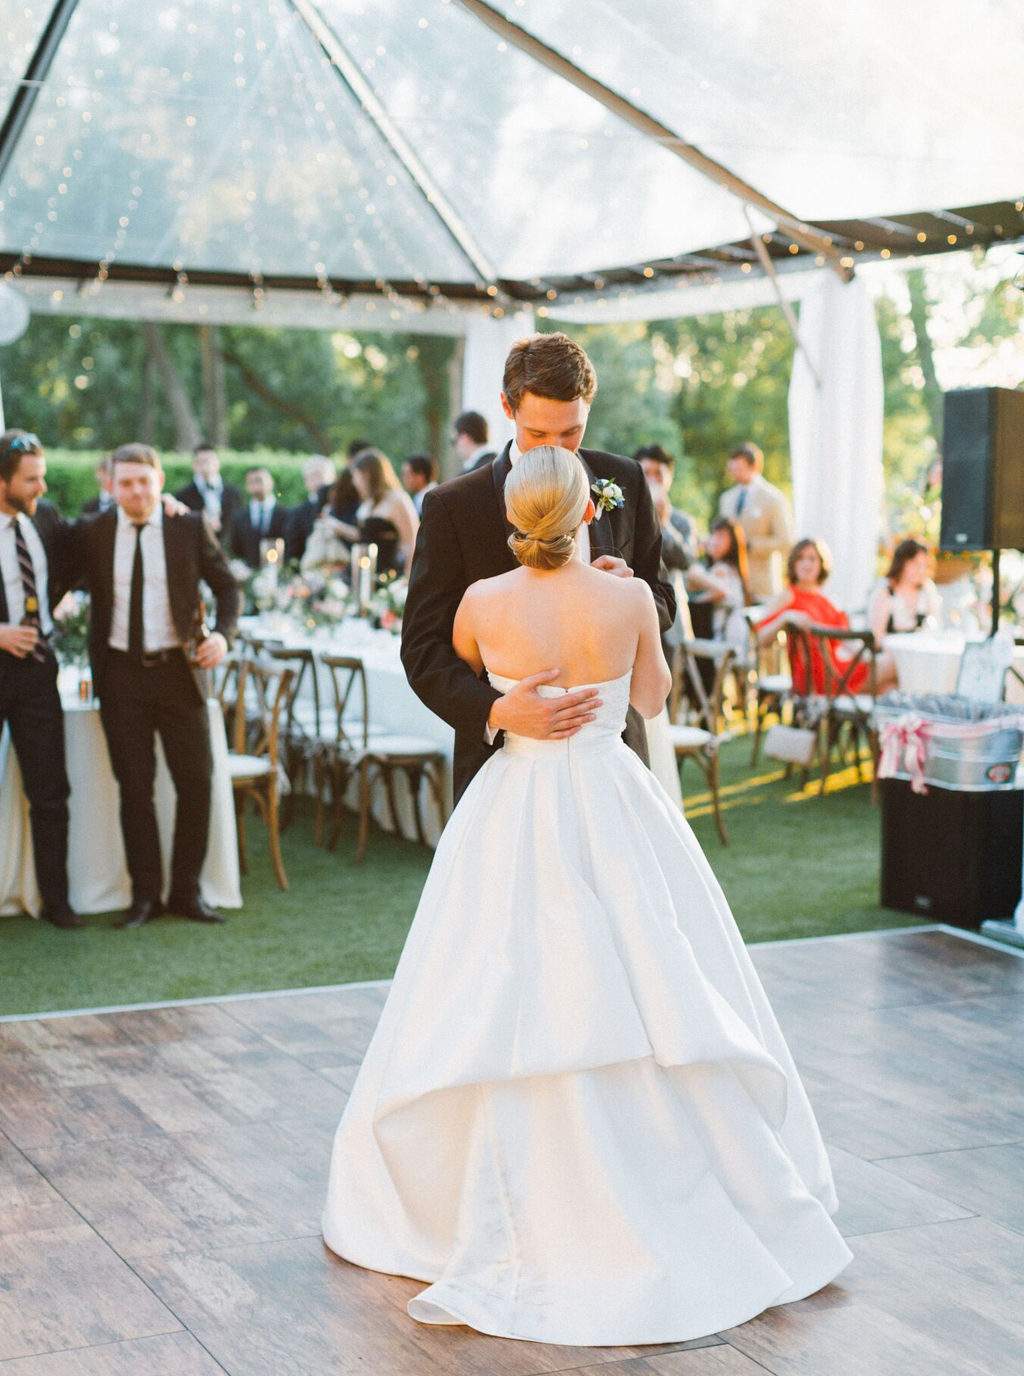 Bride and Groom First Dance Dallas Camp House Wedding Reception